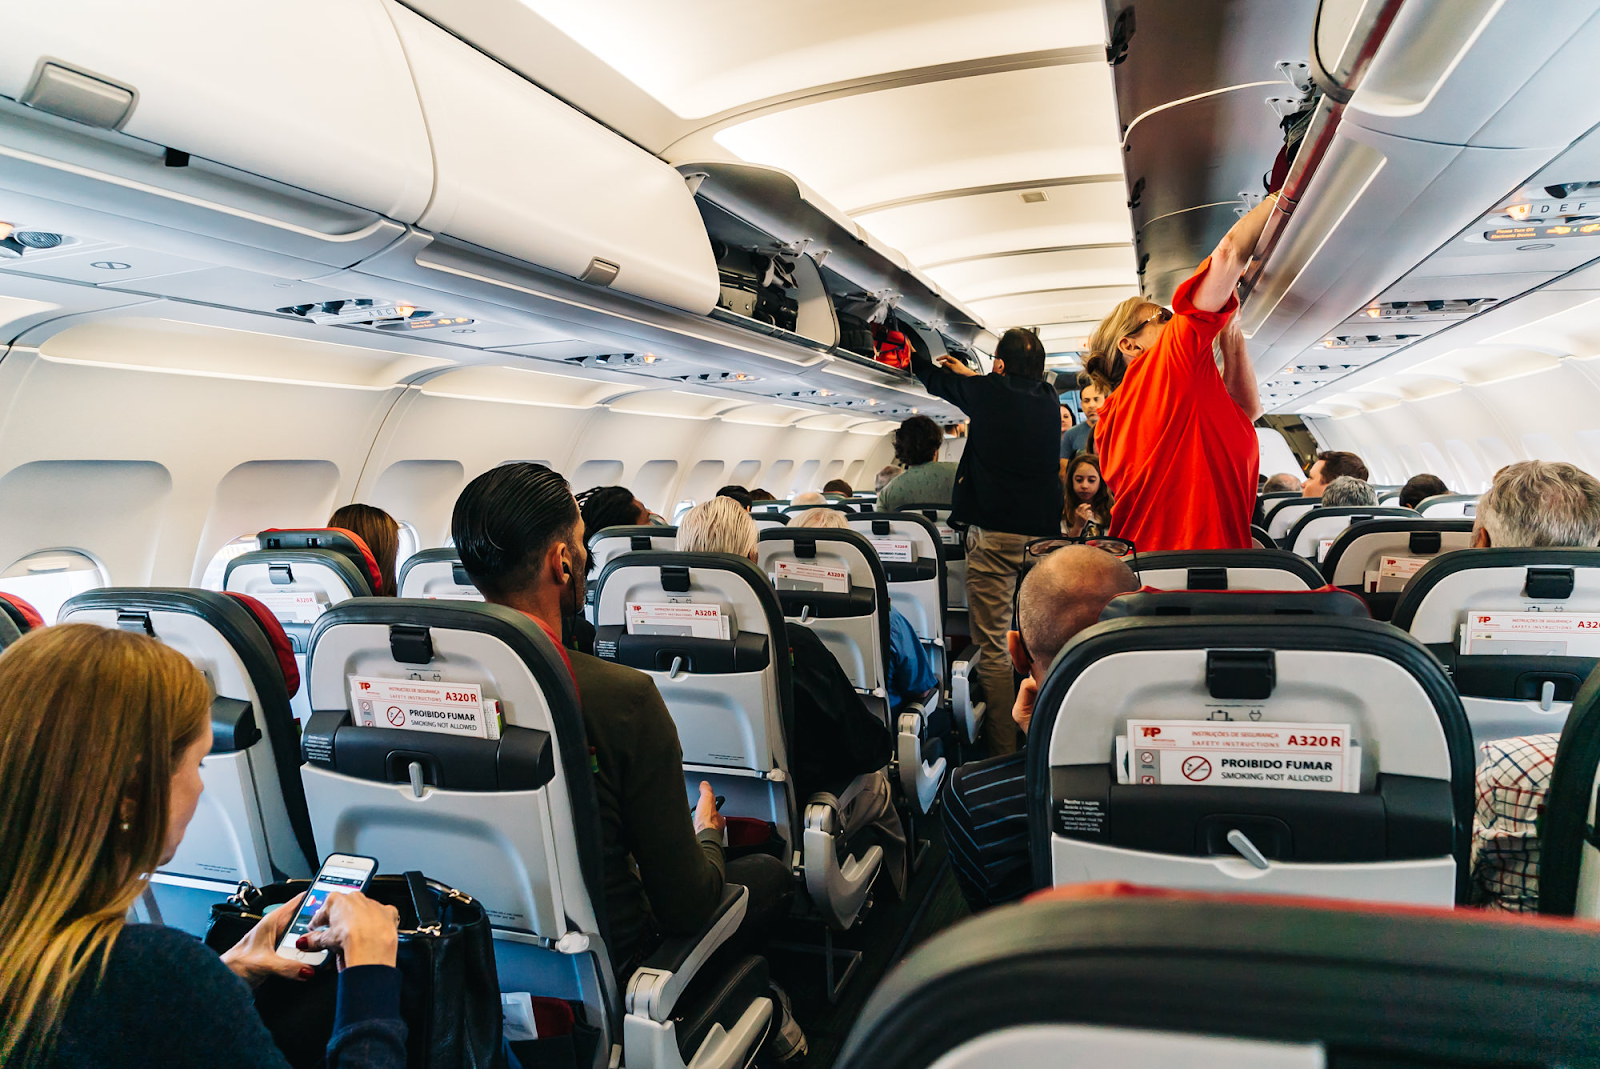 An inside the cabin view of economy class of TAP Air Portugal that shows a two seated rows with a cramped over the head luggage storage area.